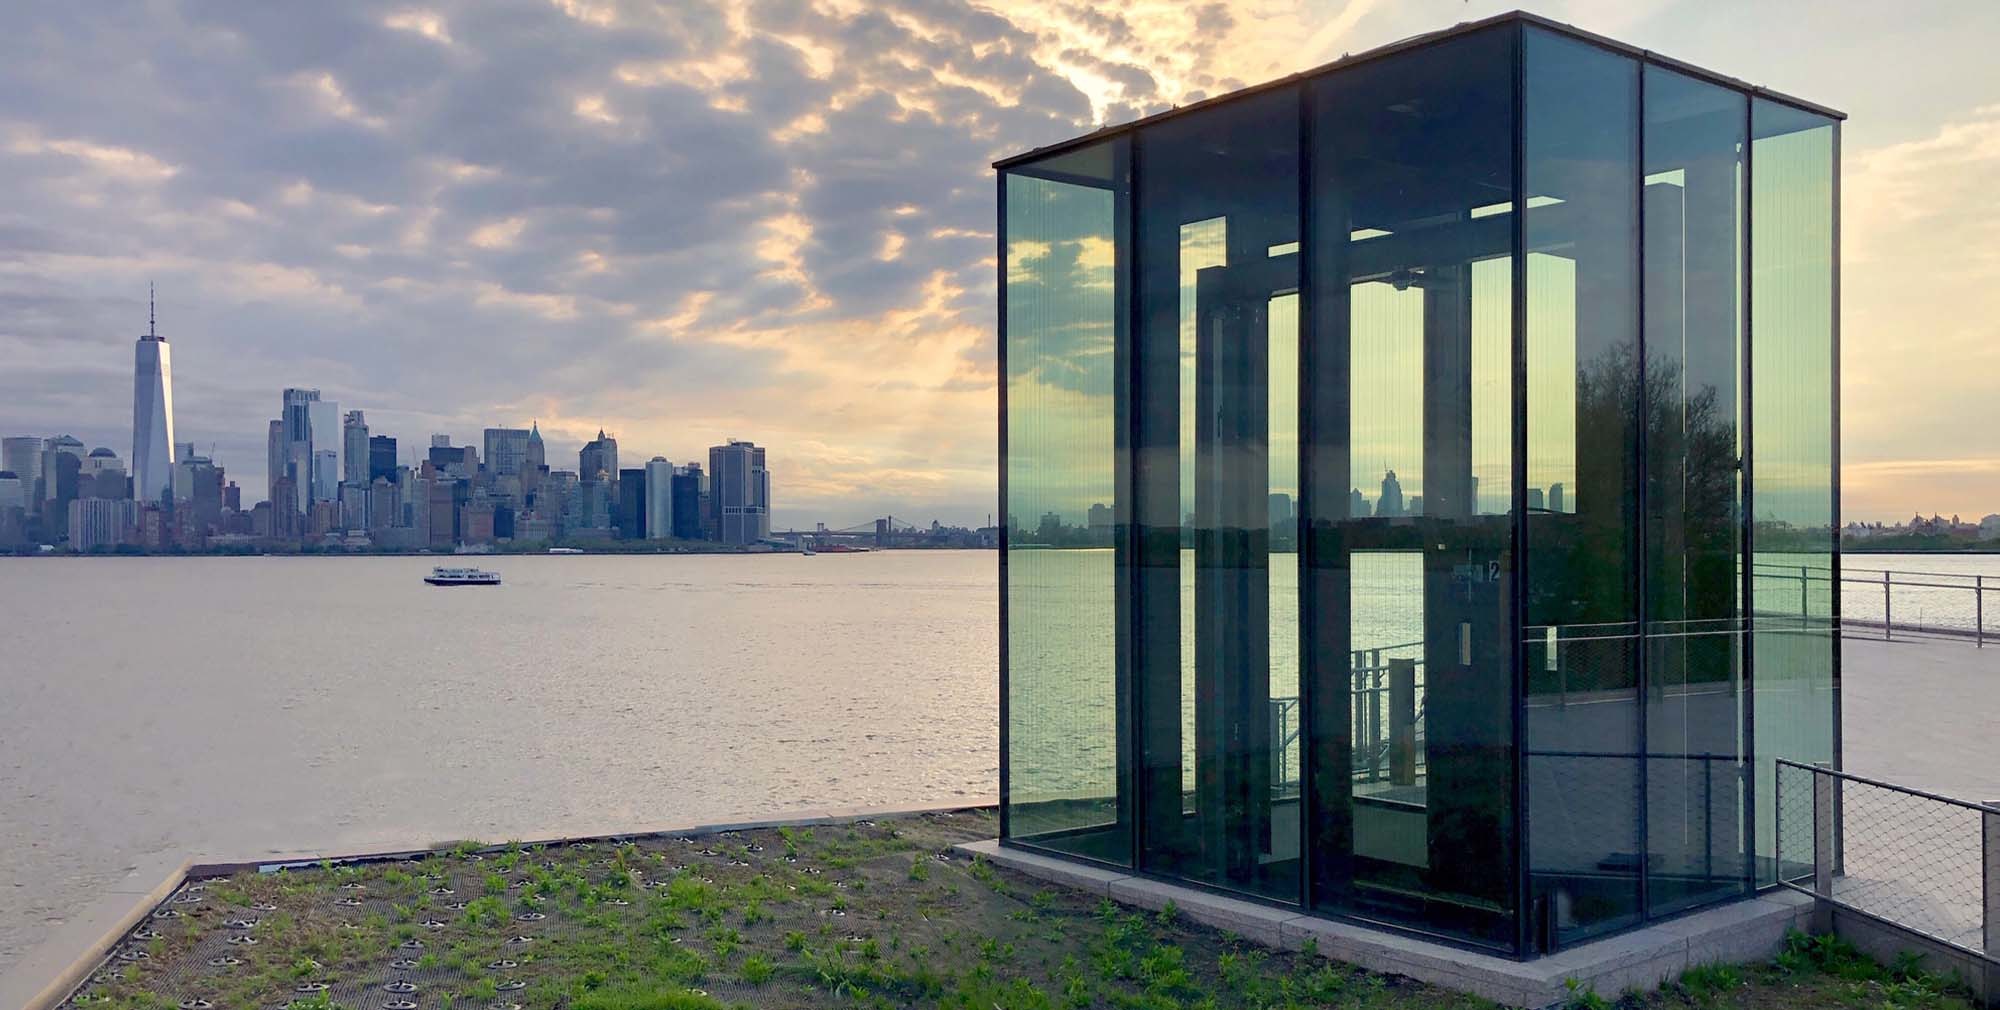 The Statue of Liberty Museum opening spring 2019 overlooks NY Harbor and the city skyline